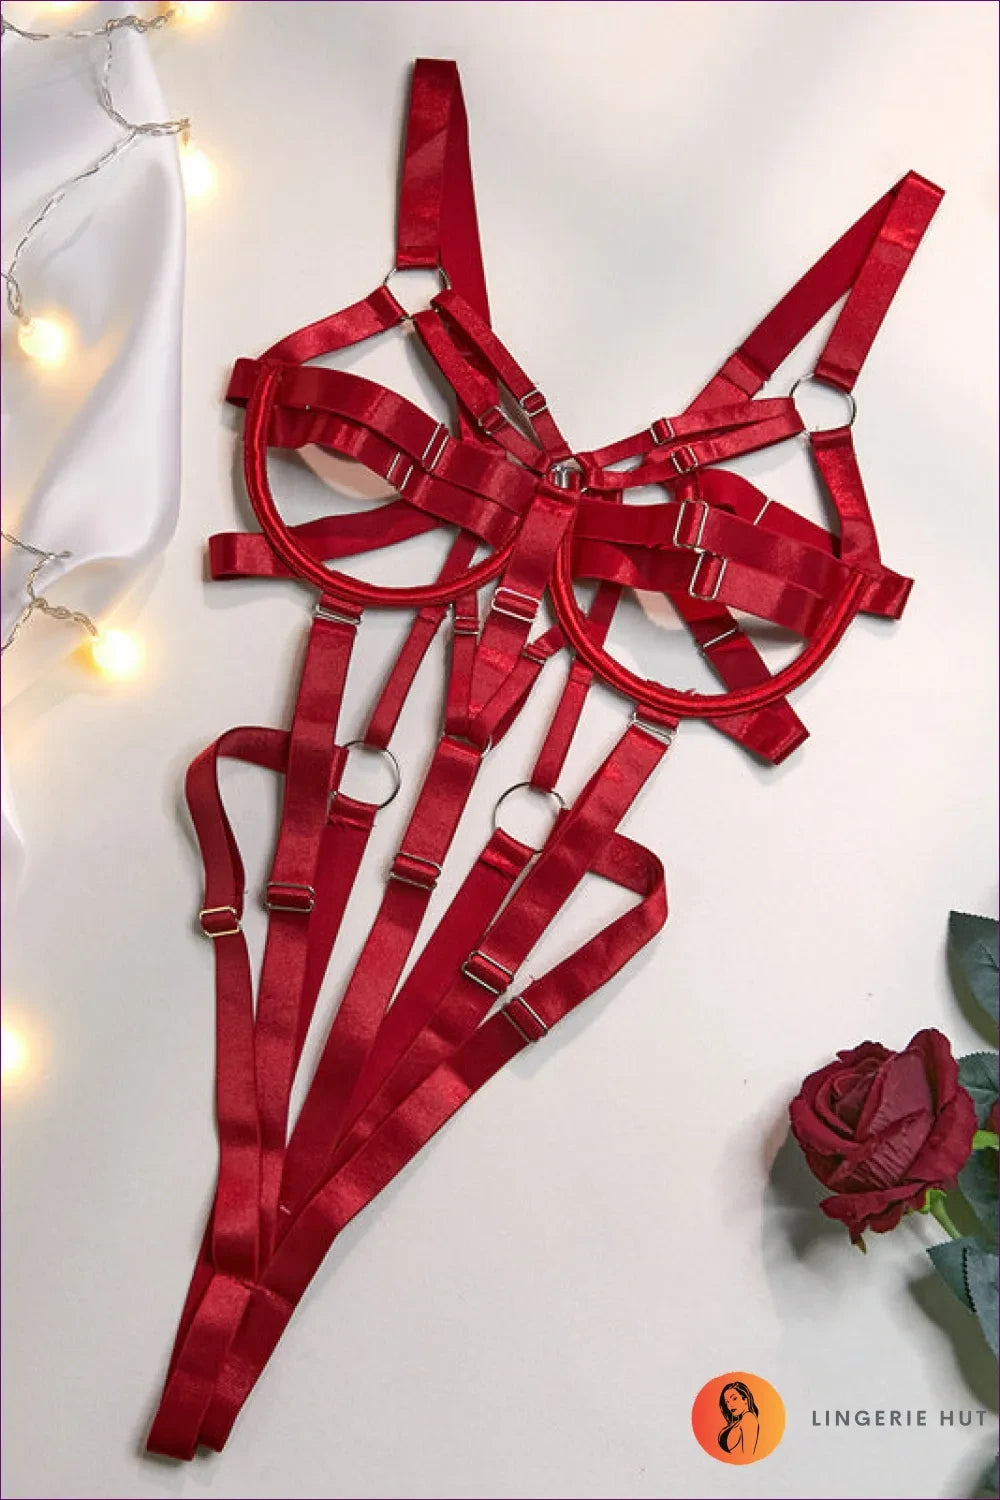 Seductive Temptress, Flaunt The Harness Straps And O-ring Drama! Showcase Your Curves Ignite Night. Limited